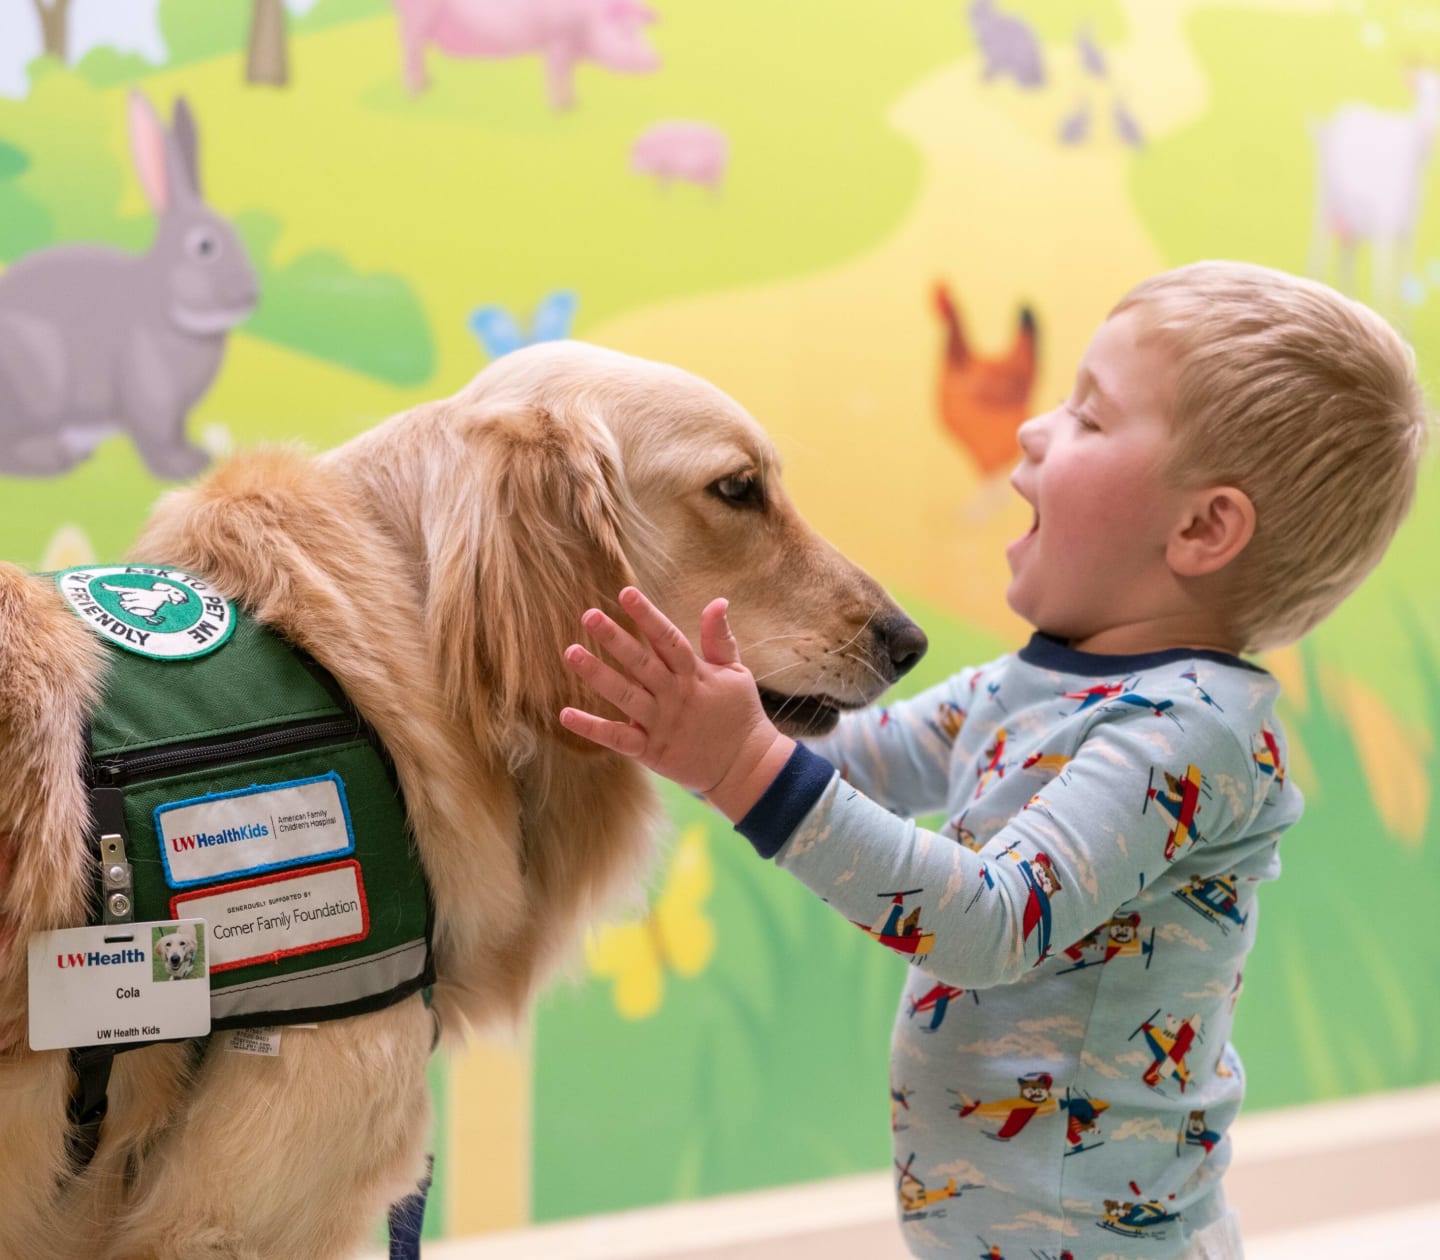 Calvin, a young boy, smiling while petting a Golden Retriever at American Family Children's Hospital.